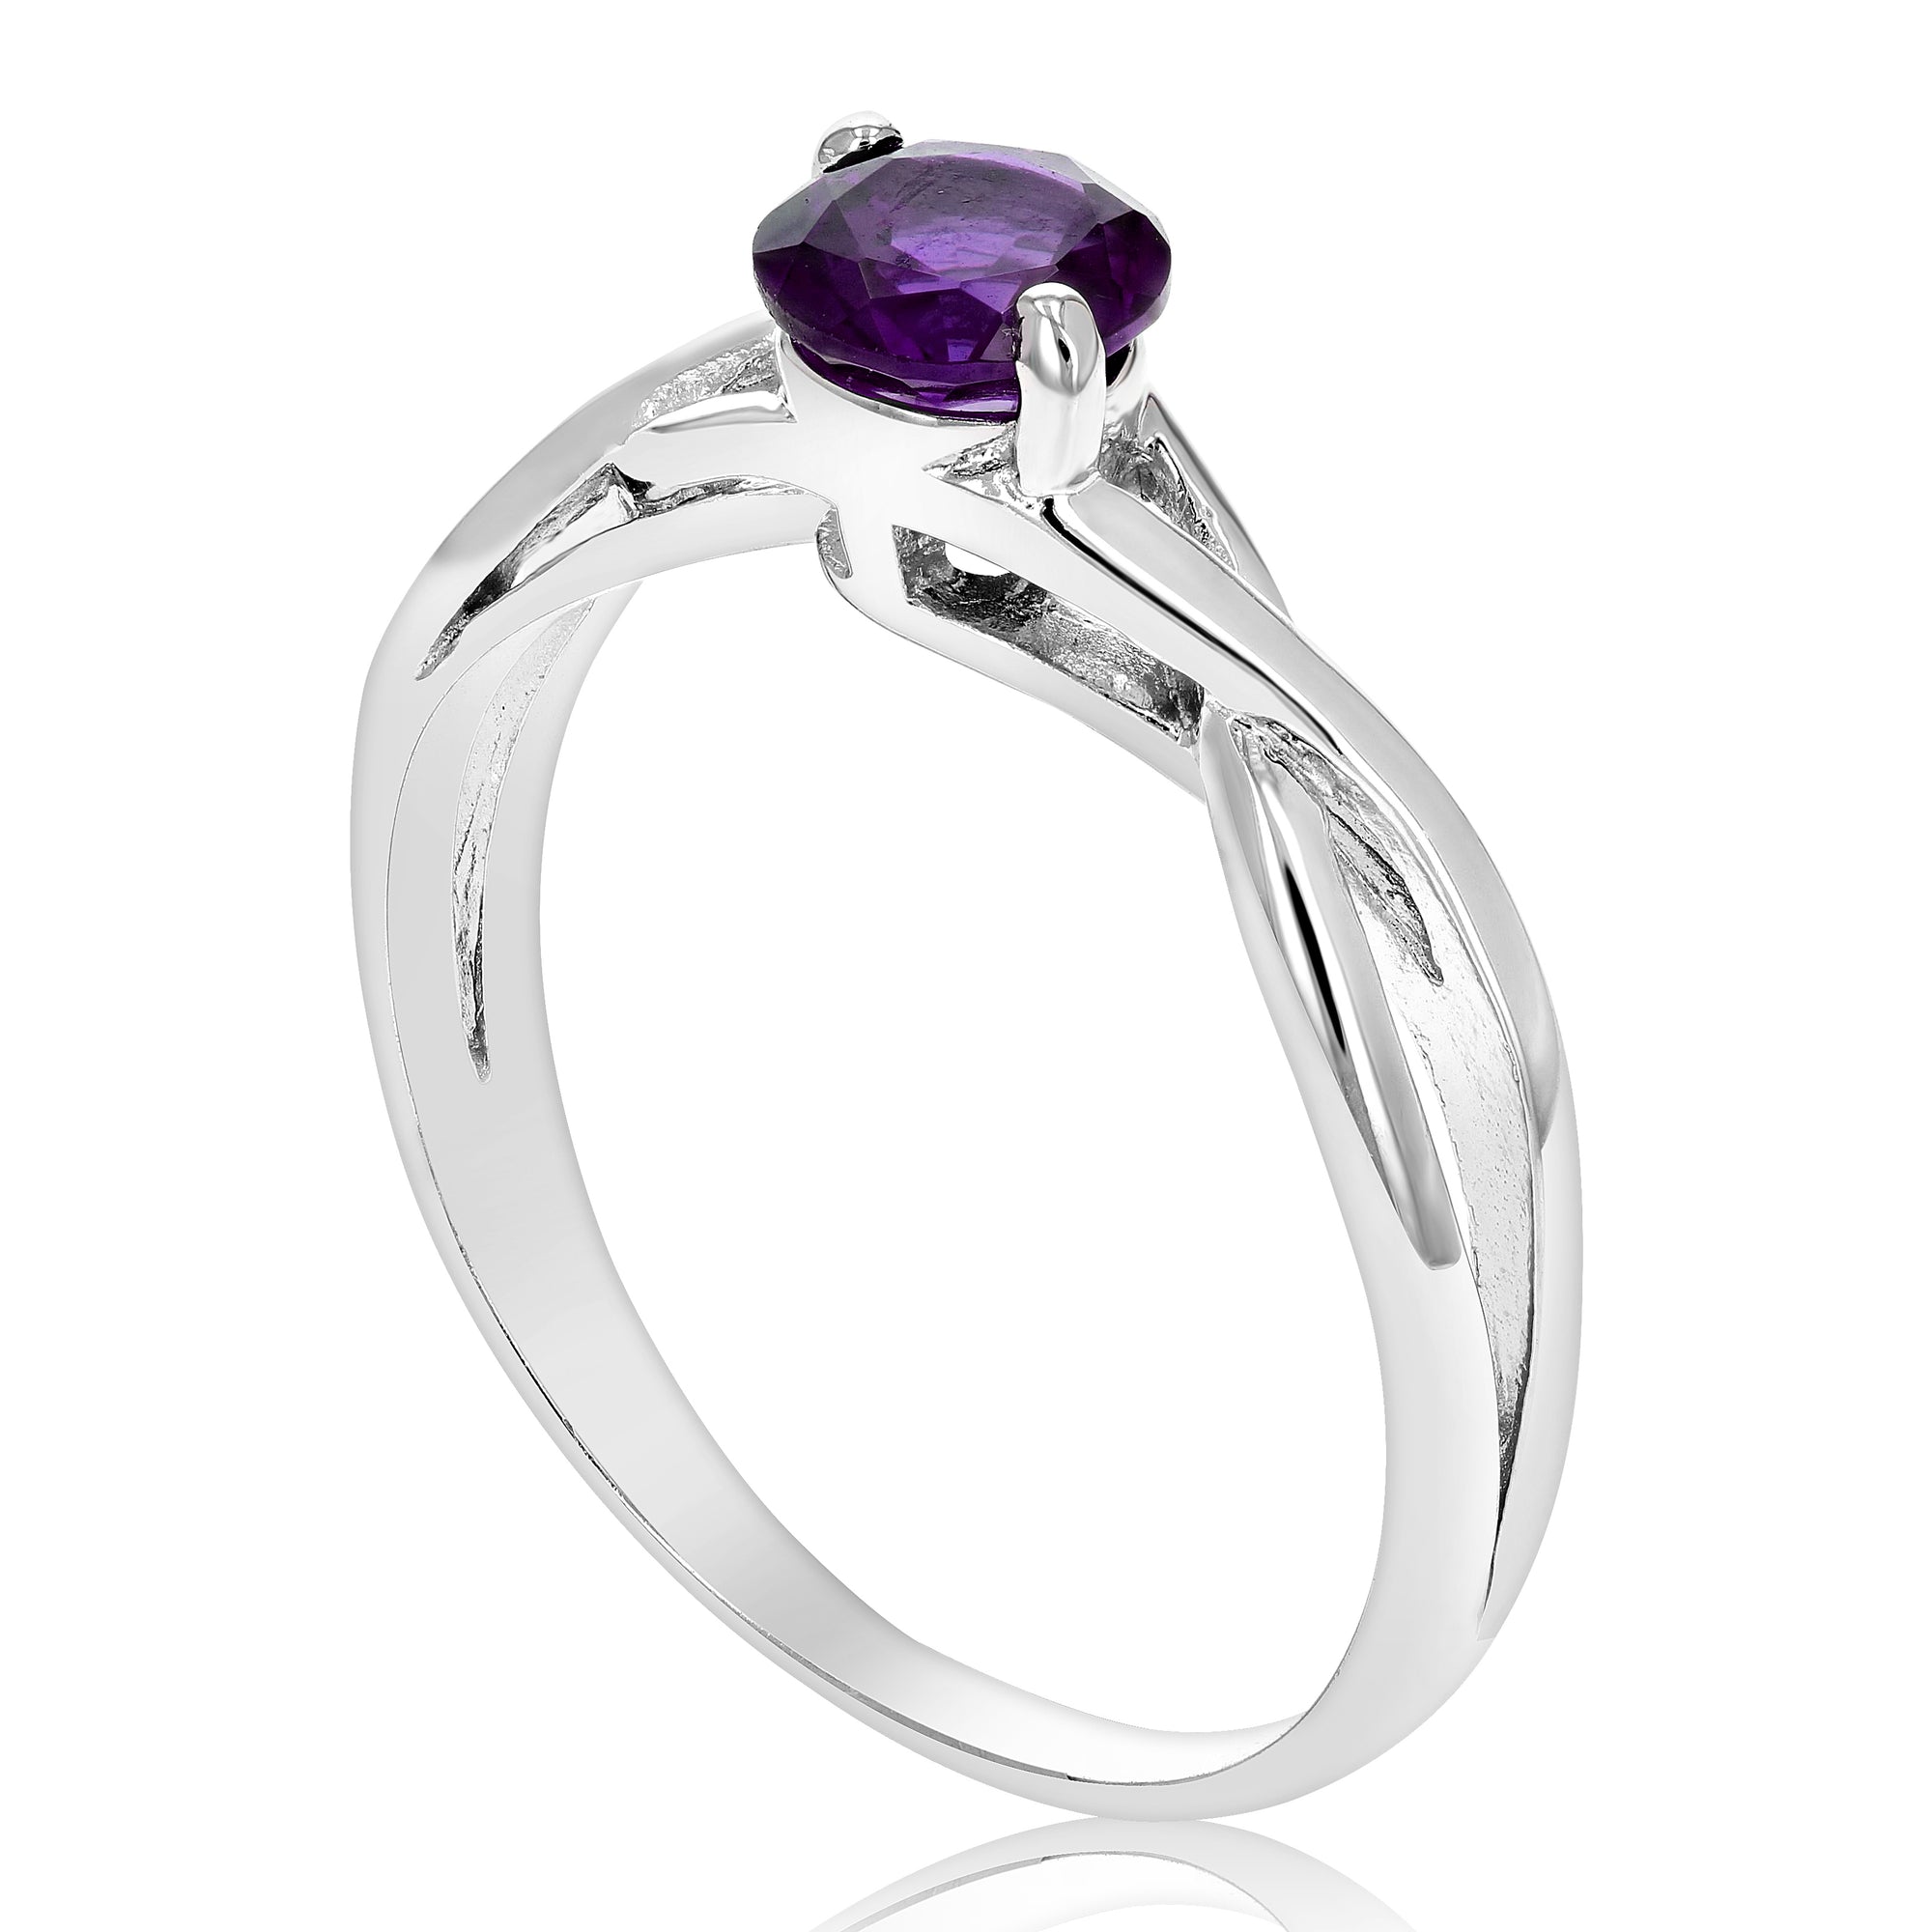 1/2 cttw Purple Amethyst Solitaire Ring .925 Sterling Silver Twisted Design 6 MM